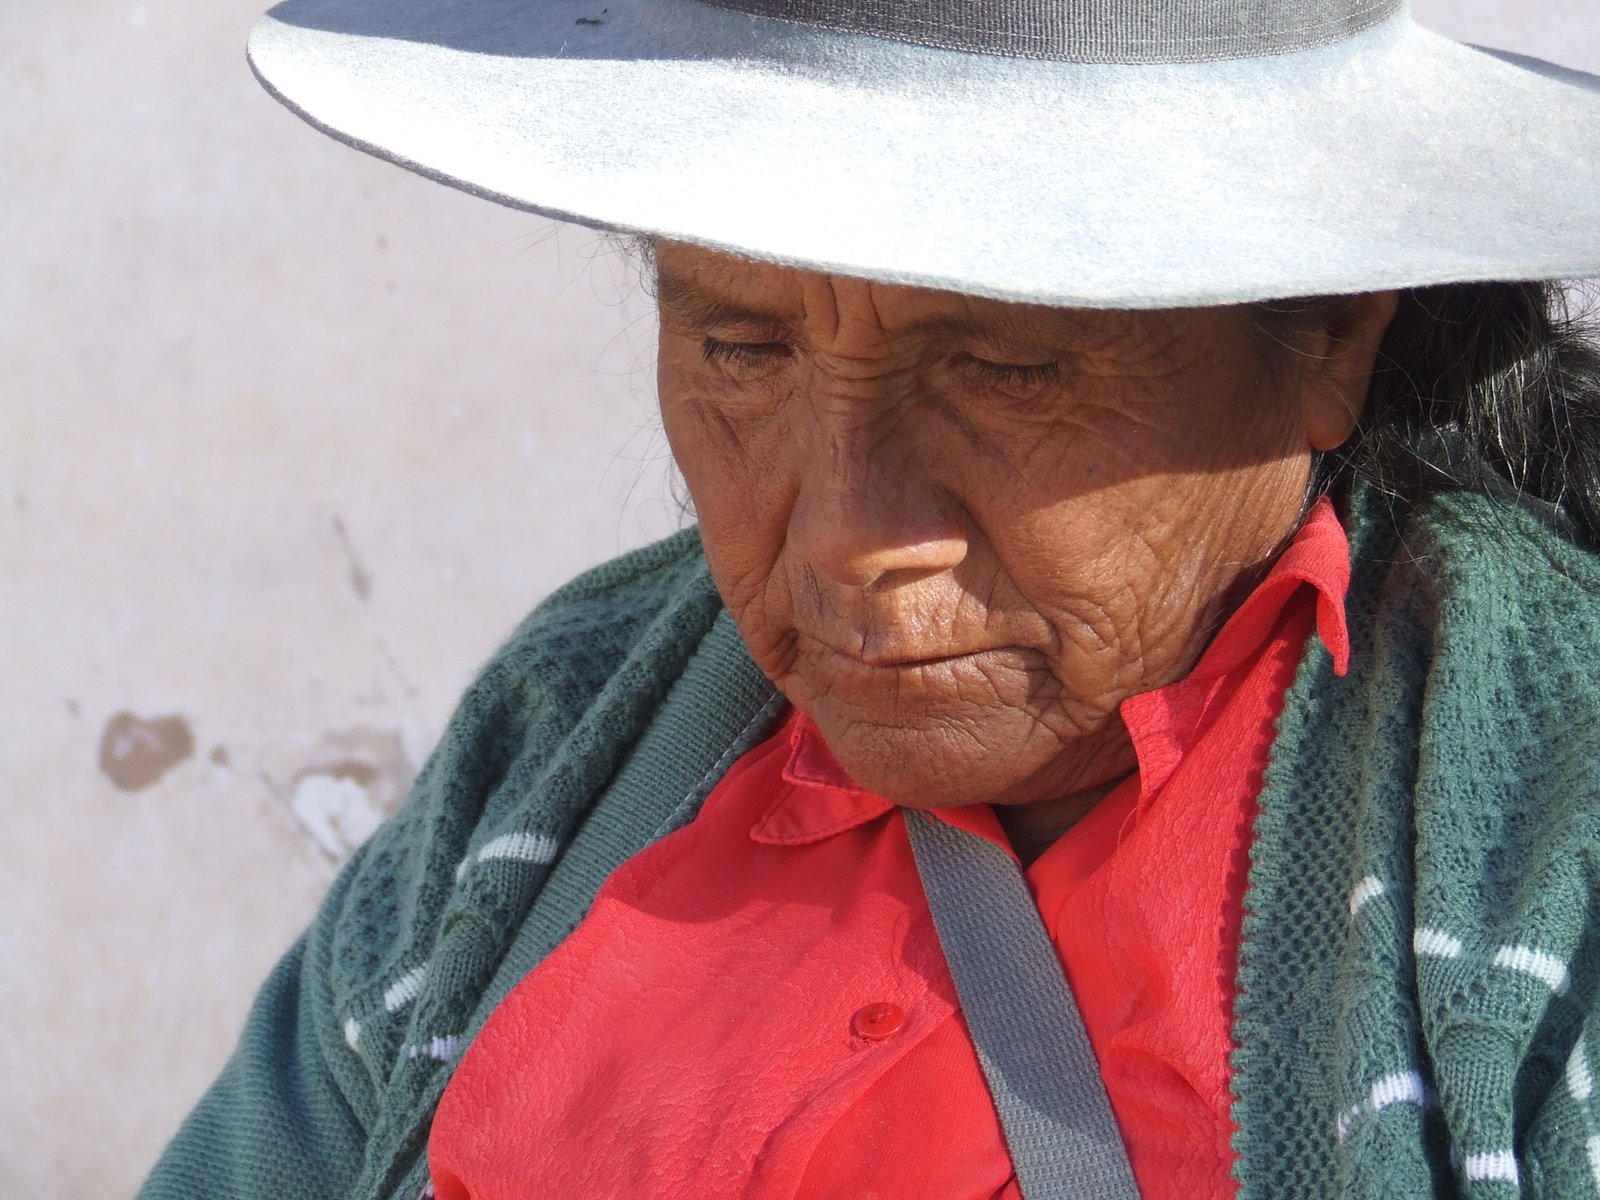 an old woman with a white hat standing outdoors